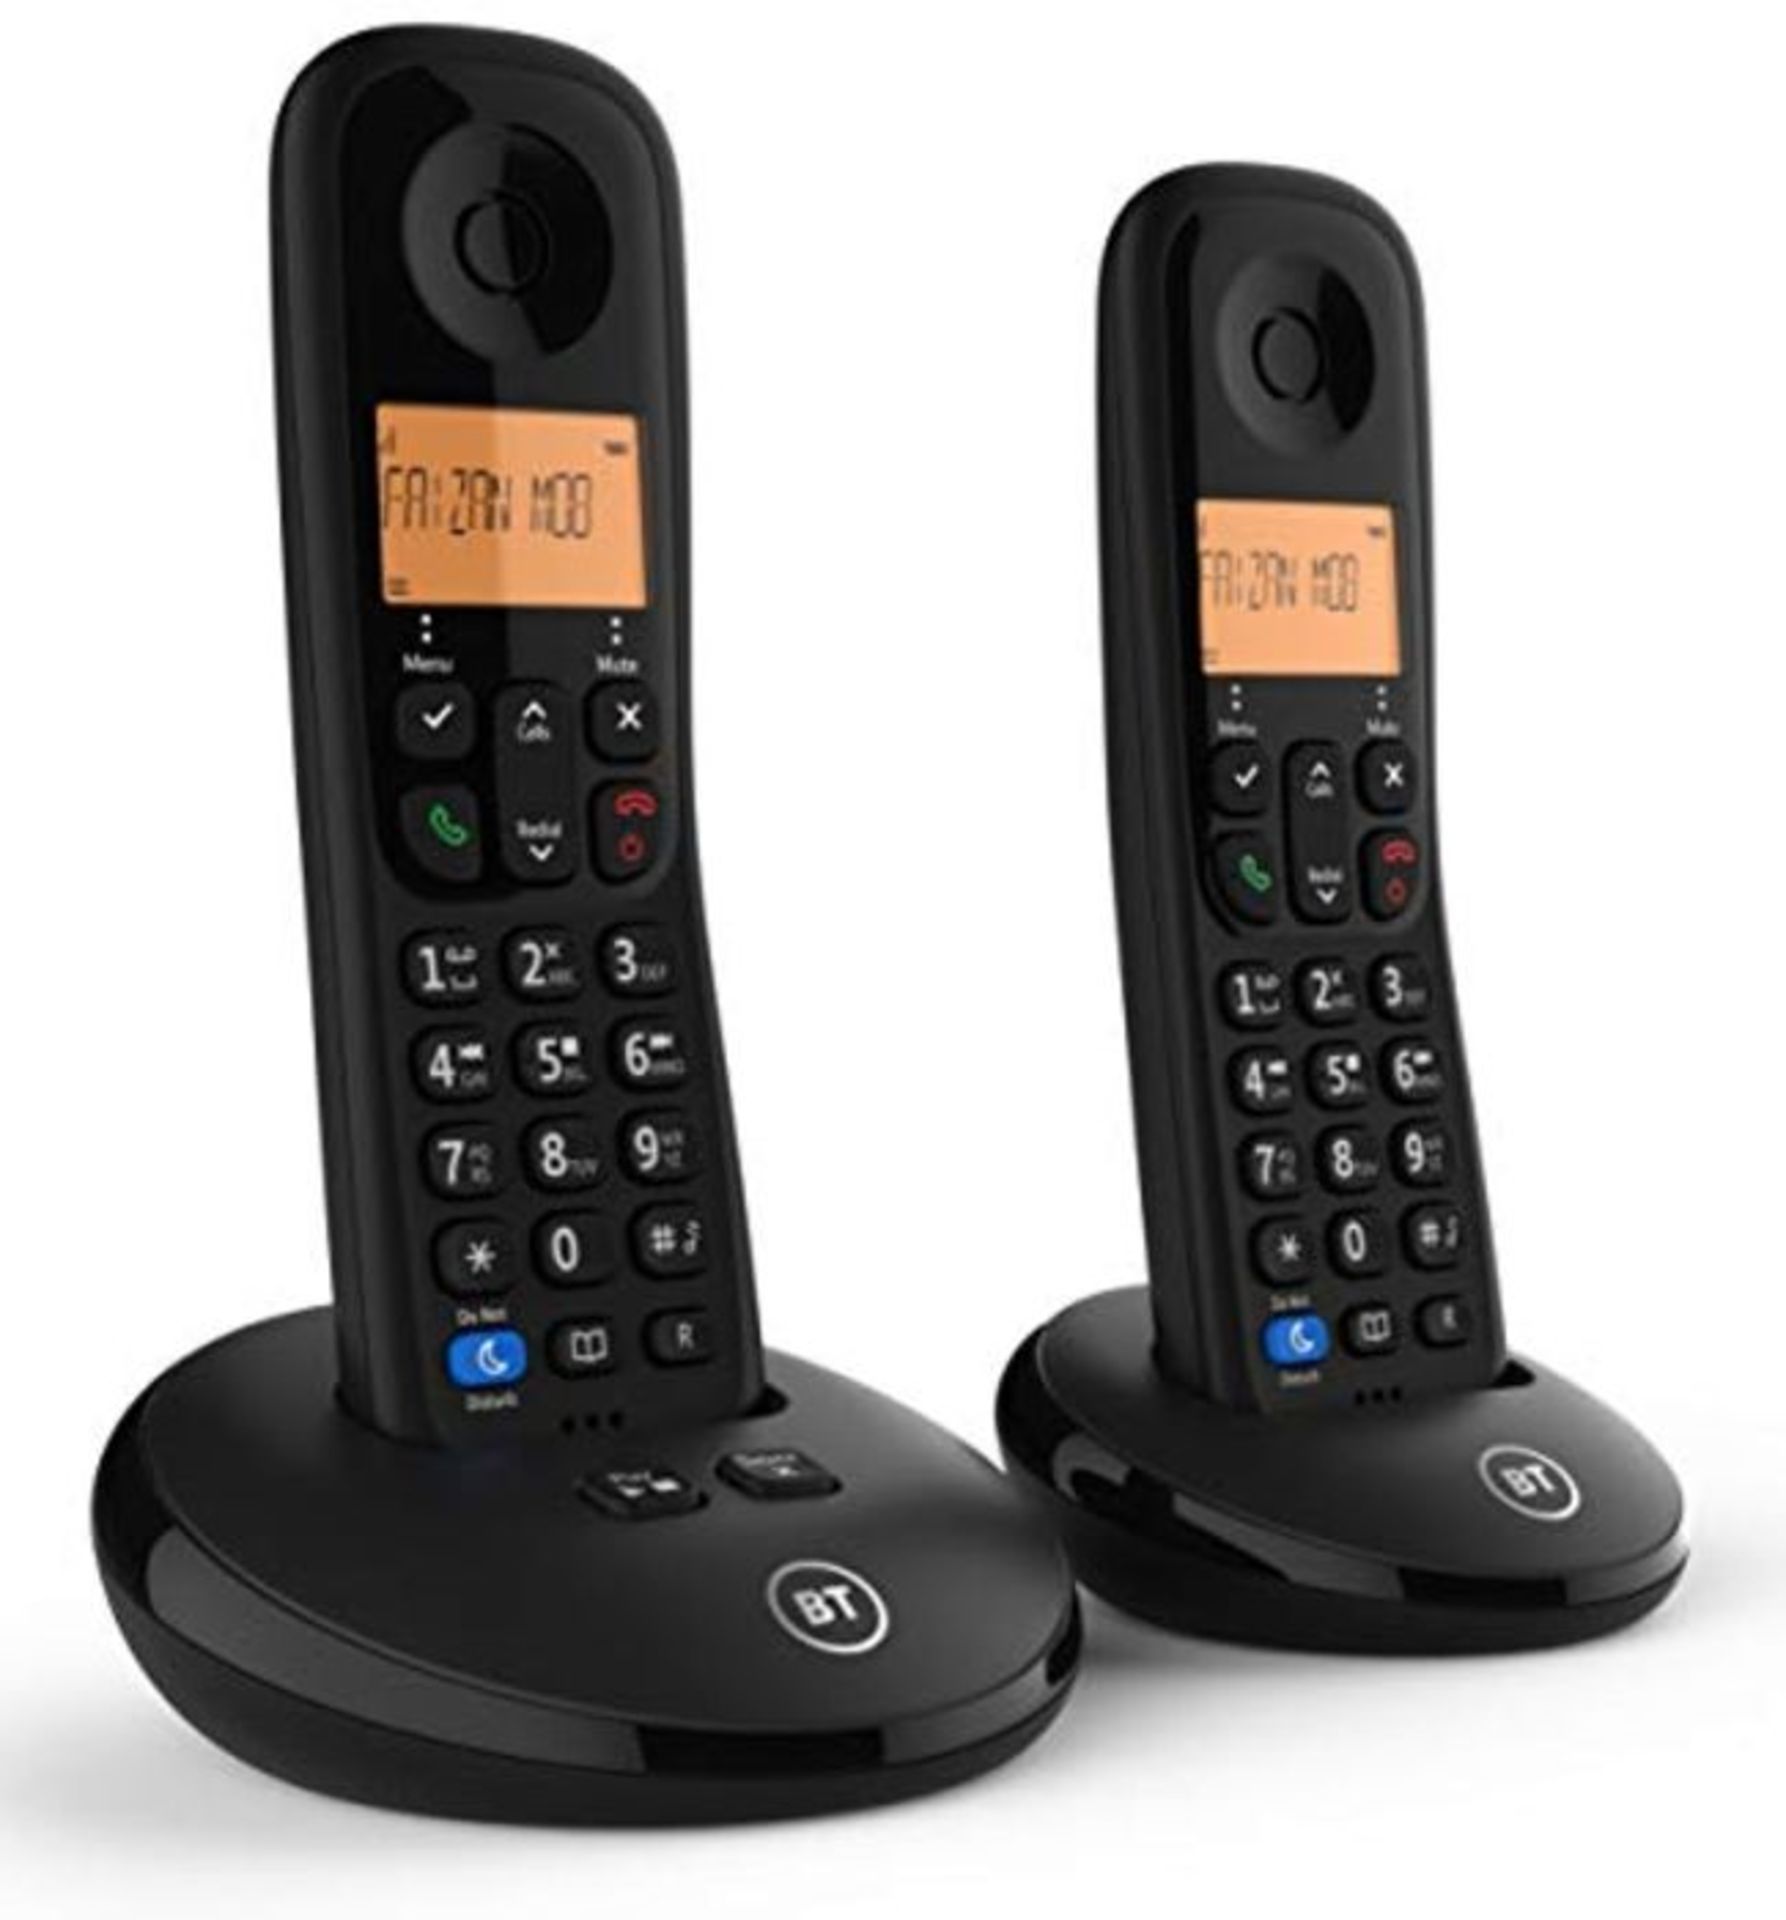 BT Everyday Cordless Home Phone with Basic Call Blocking and Answering Machine, Twin H